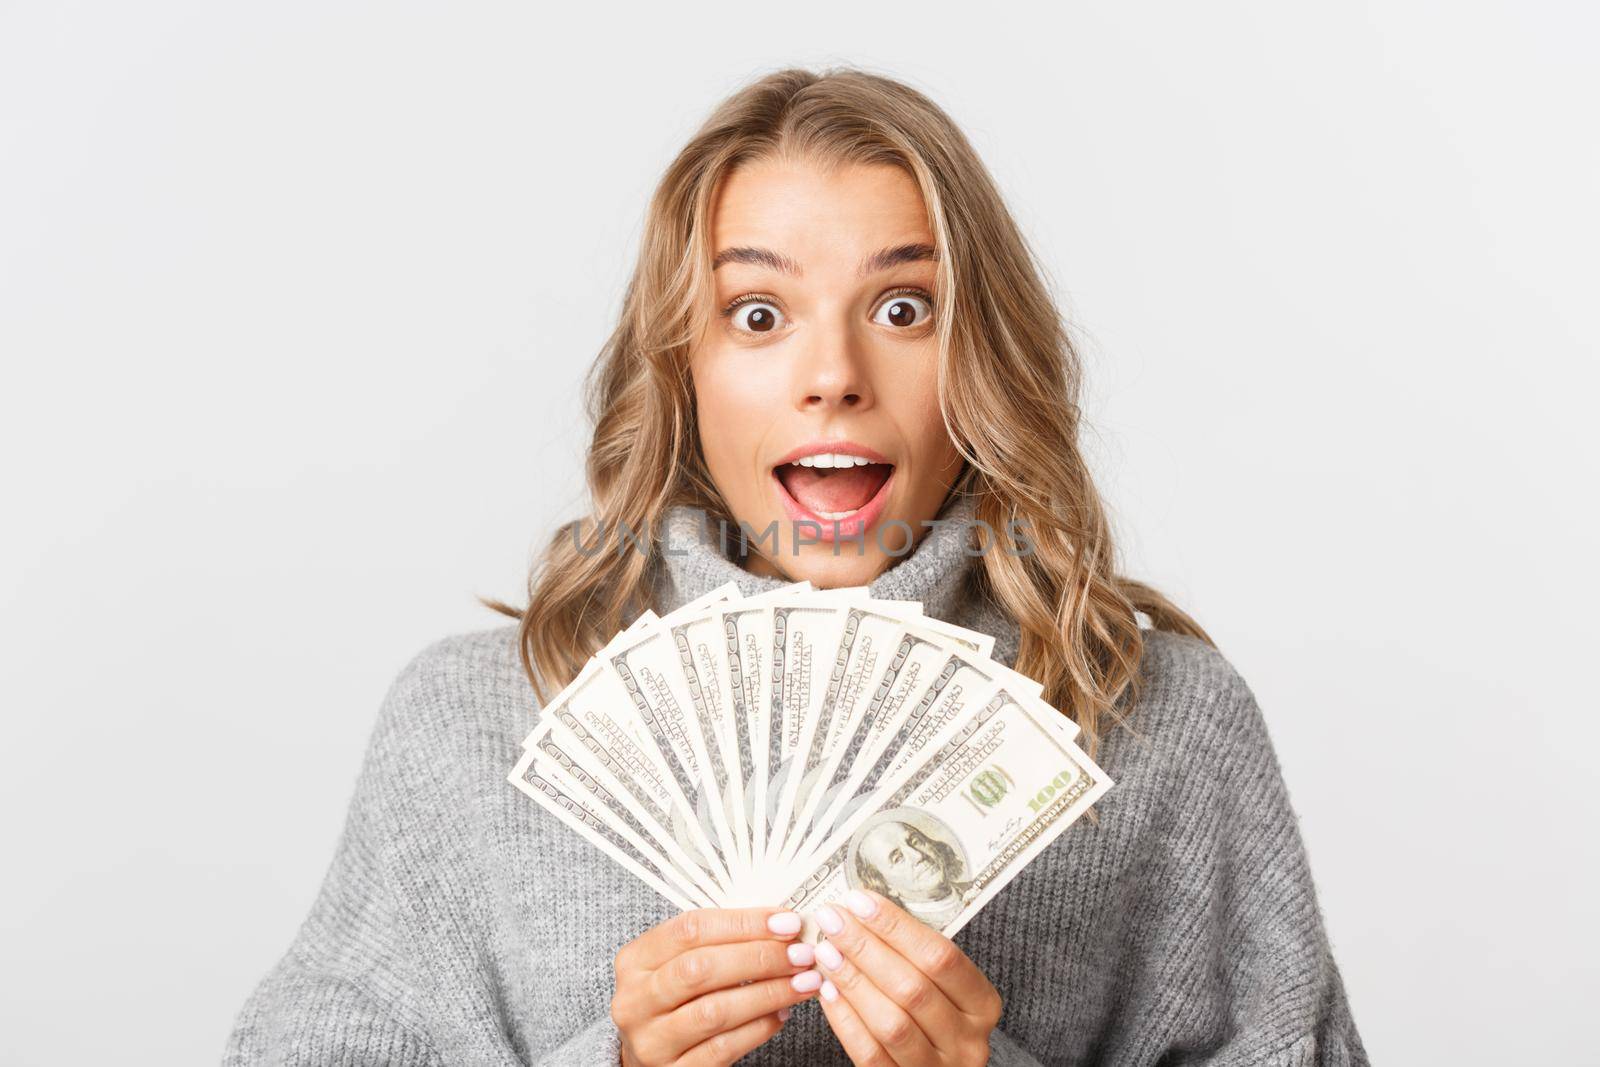 Close-up of excited rich girl with blond short hair, holding money and smiling amazed, standing over white background.